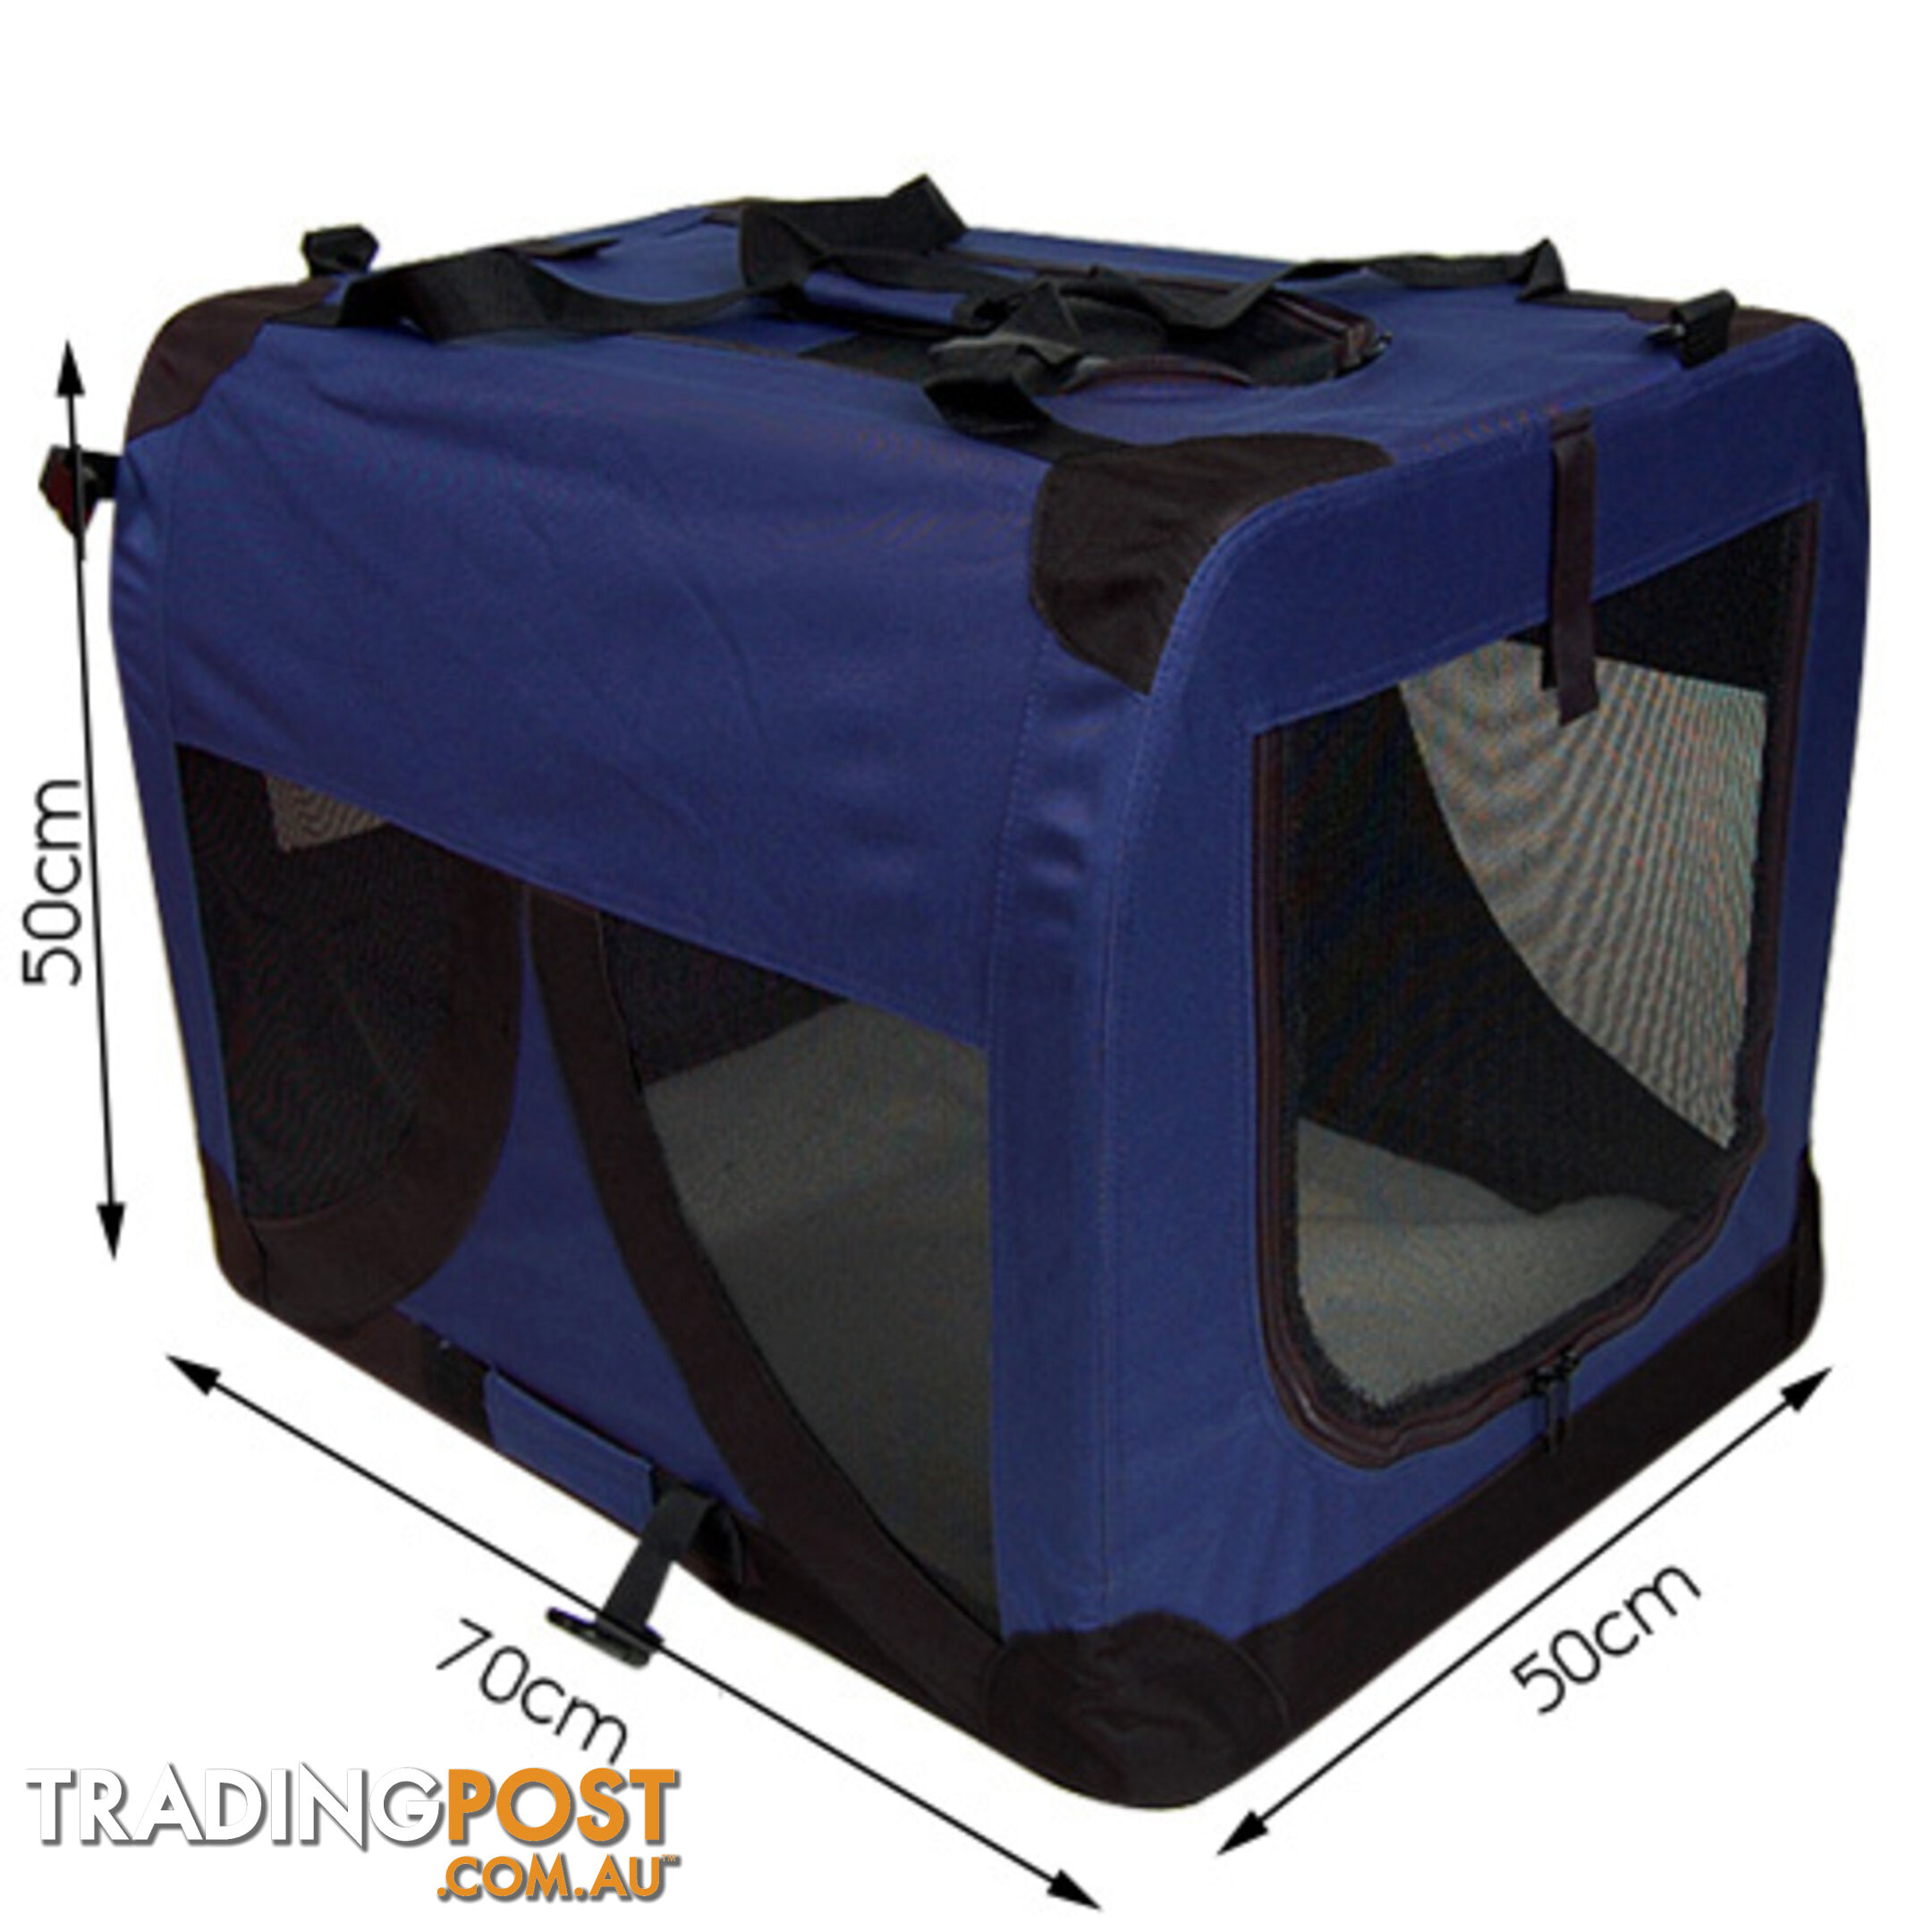 Large Portable Soft Pet Dog Crate Cage Kennel Blue